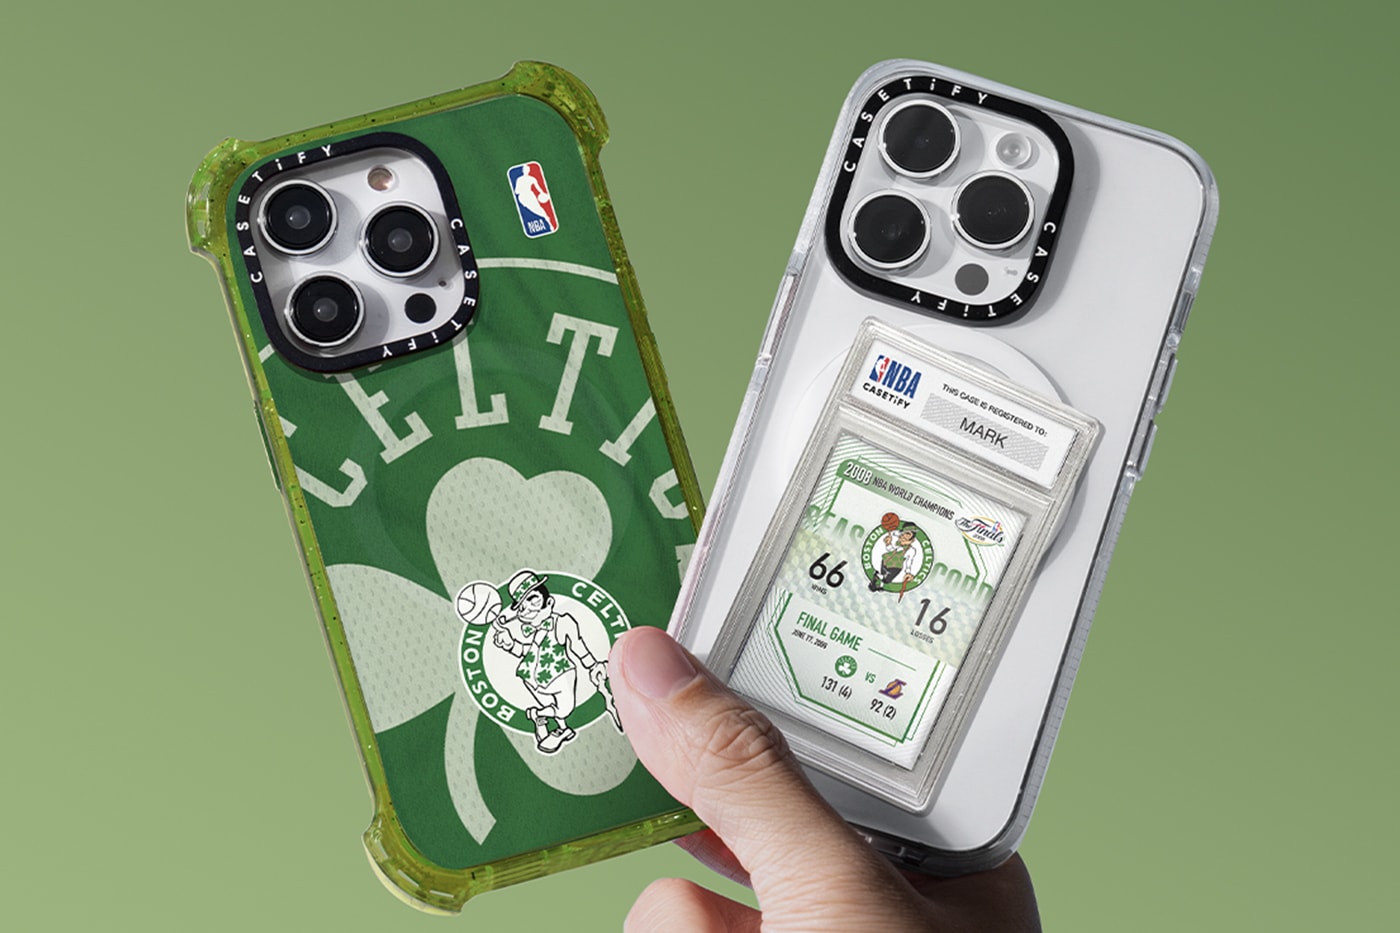 CASETiFY Drops Third NBA Capsule Just In Time for Playoffs phone acessories iphone android phone cases chicago bulls philadelphia 76ers boston celtics milwaukee bucks los angeles lakers golden state warriors 